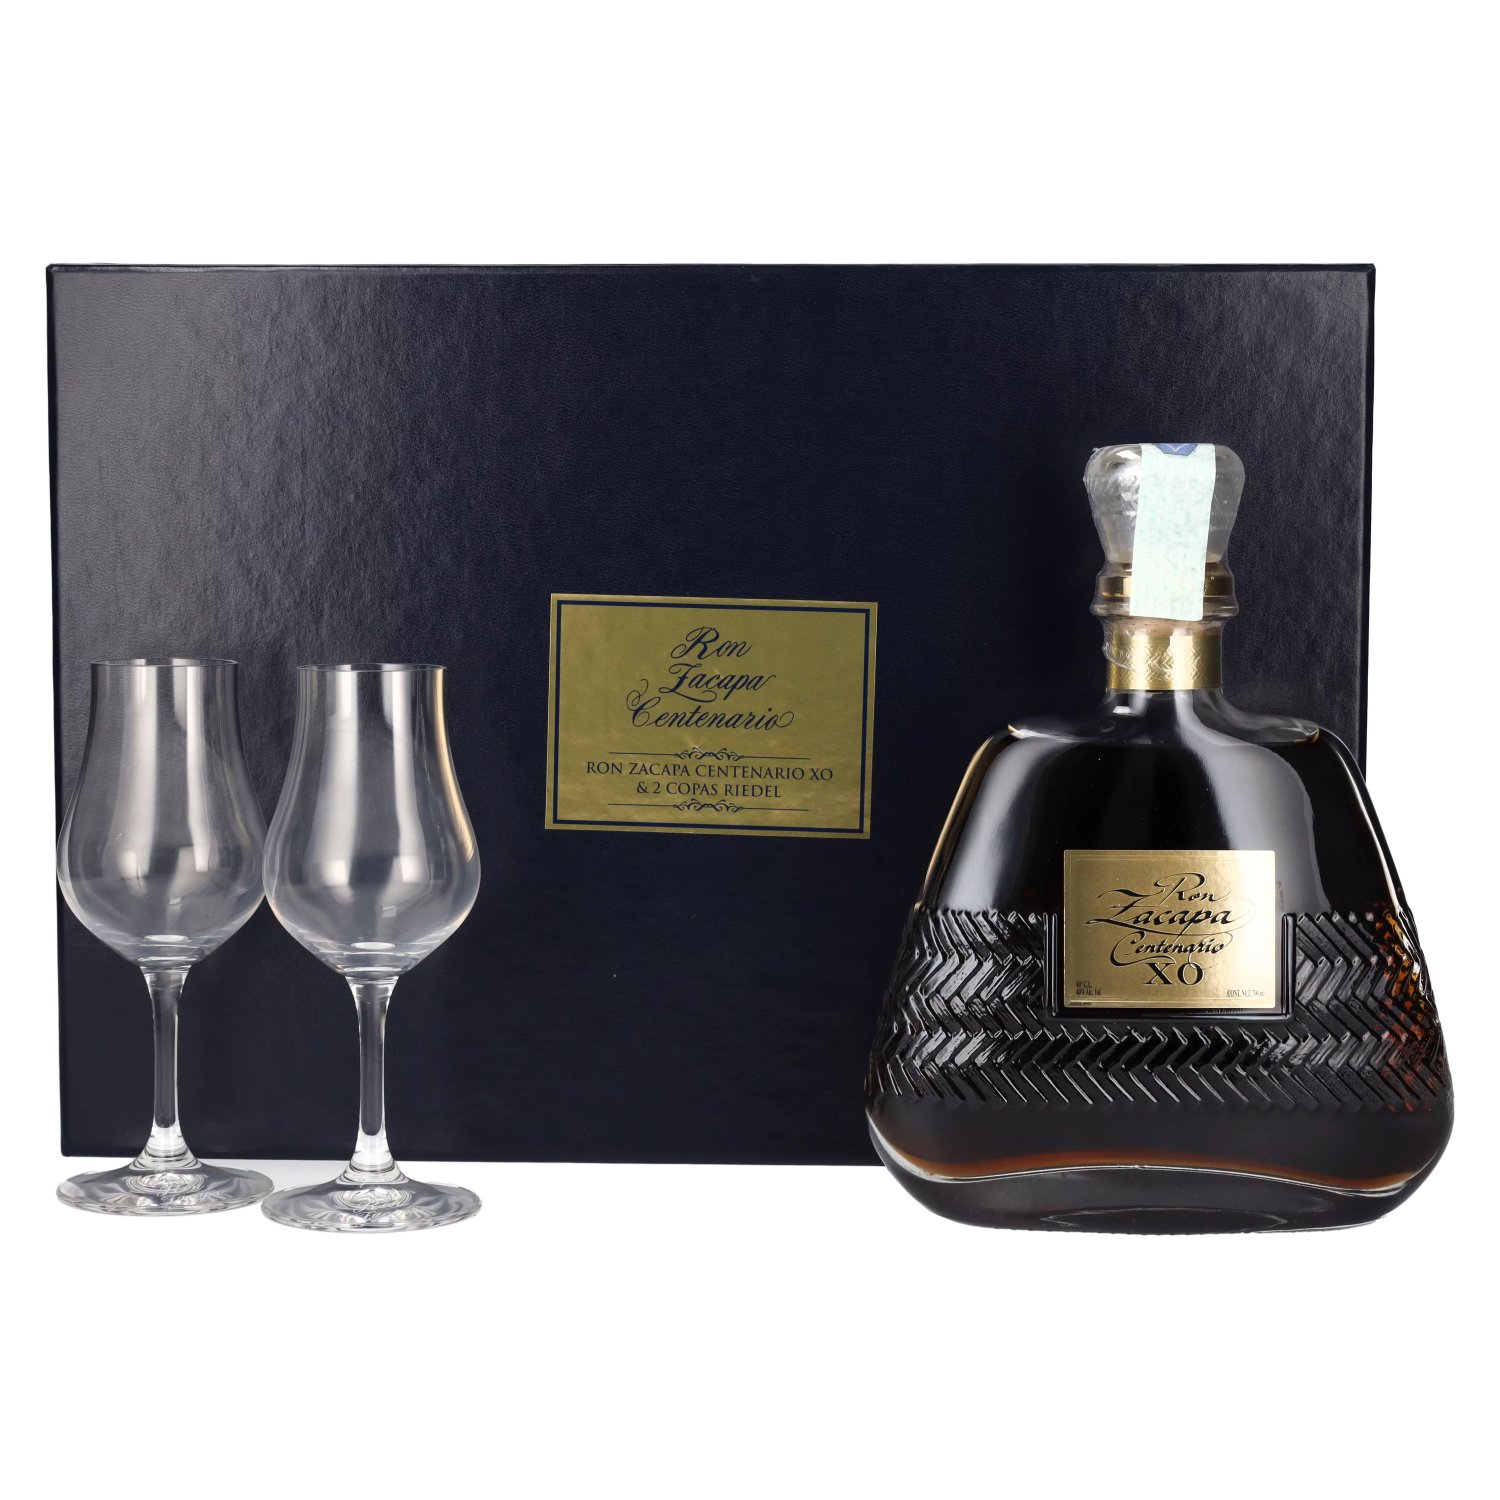 BUY] Ron Zacapa XO (RECOMMENDED) at